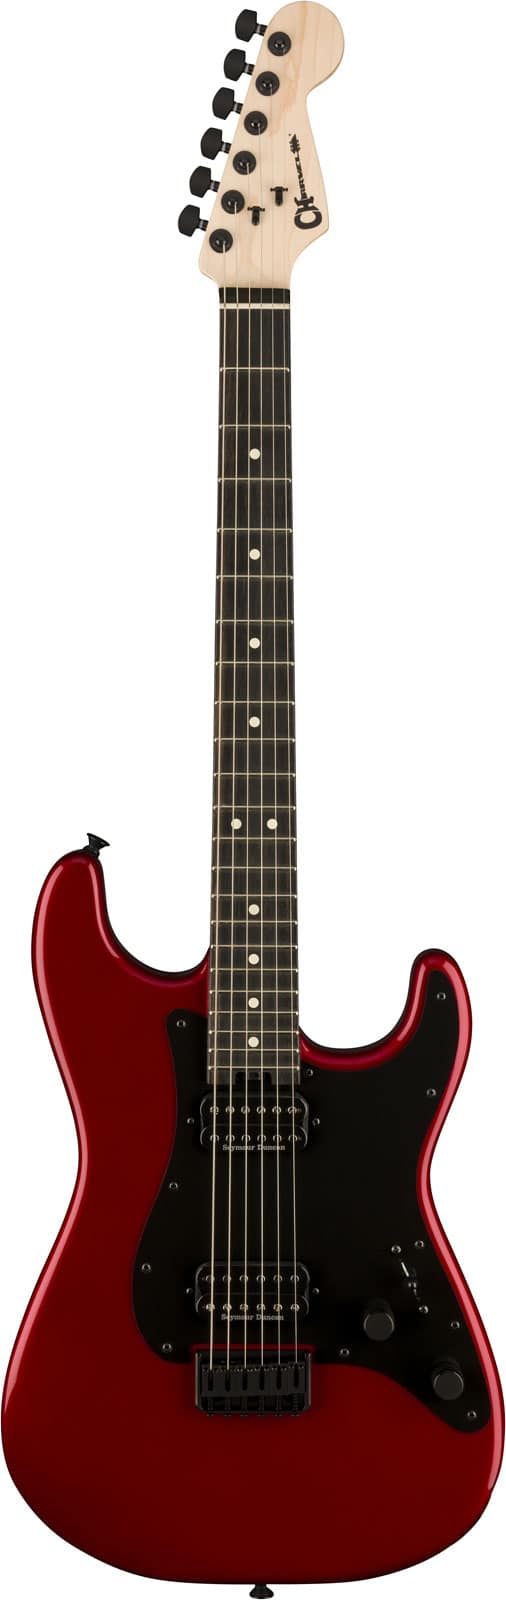 CHARVEL PRO-MOD SO-CAL STYLE 1 HH HT E EBO CANDY APPLE RED